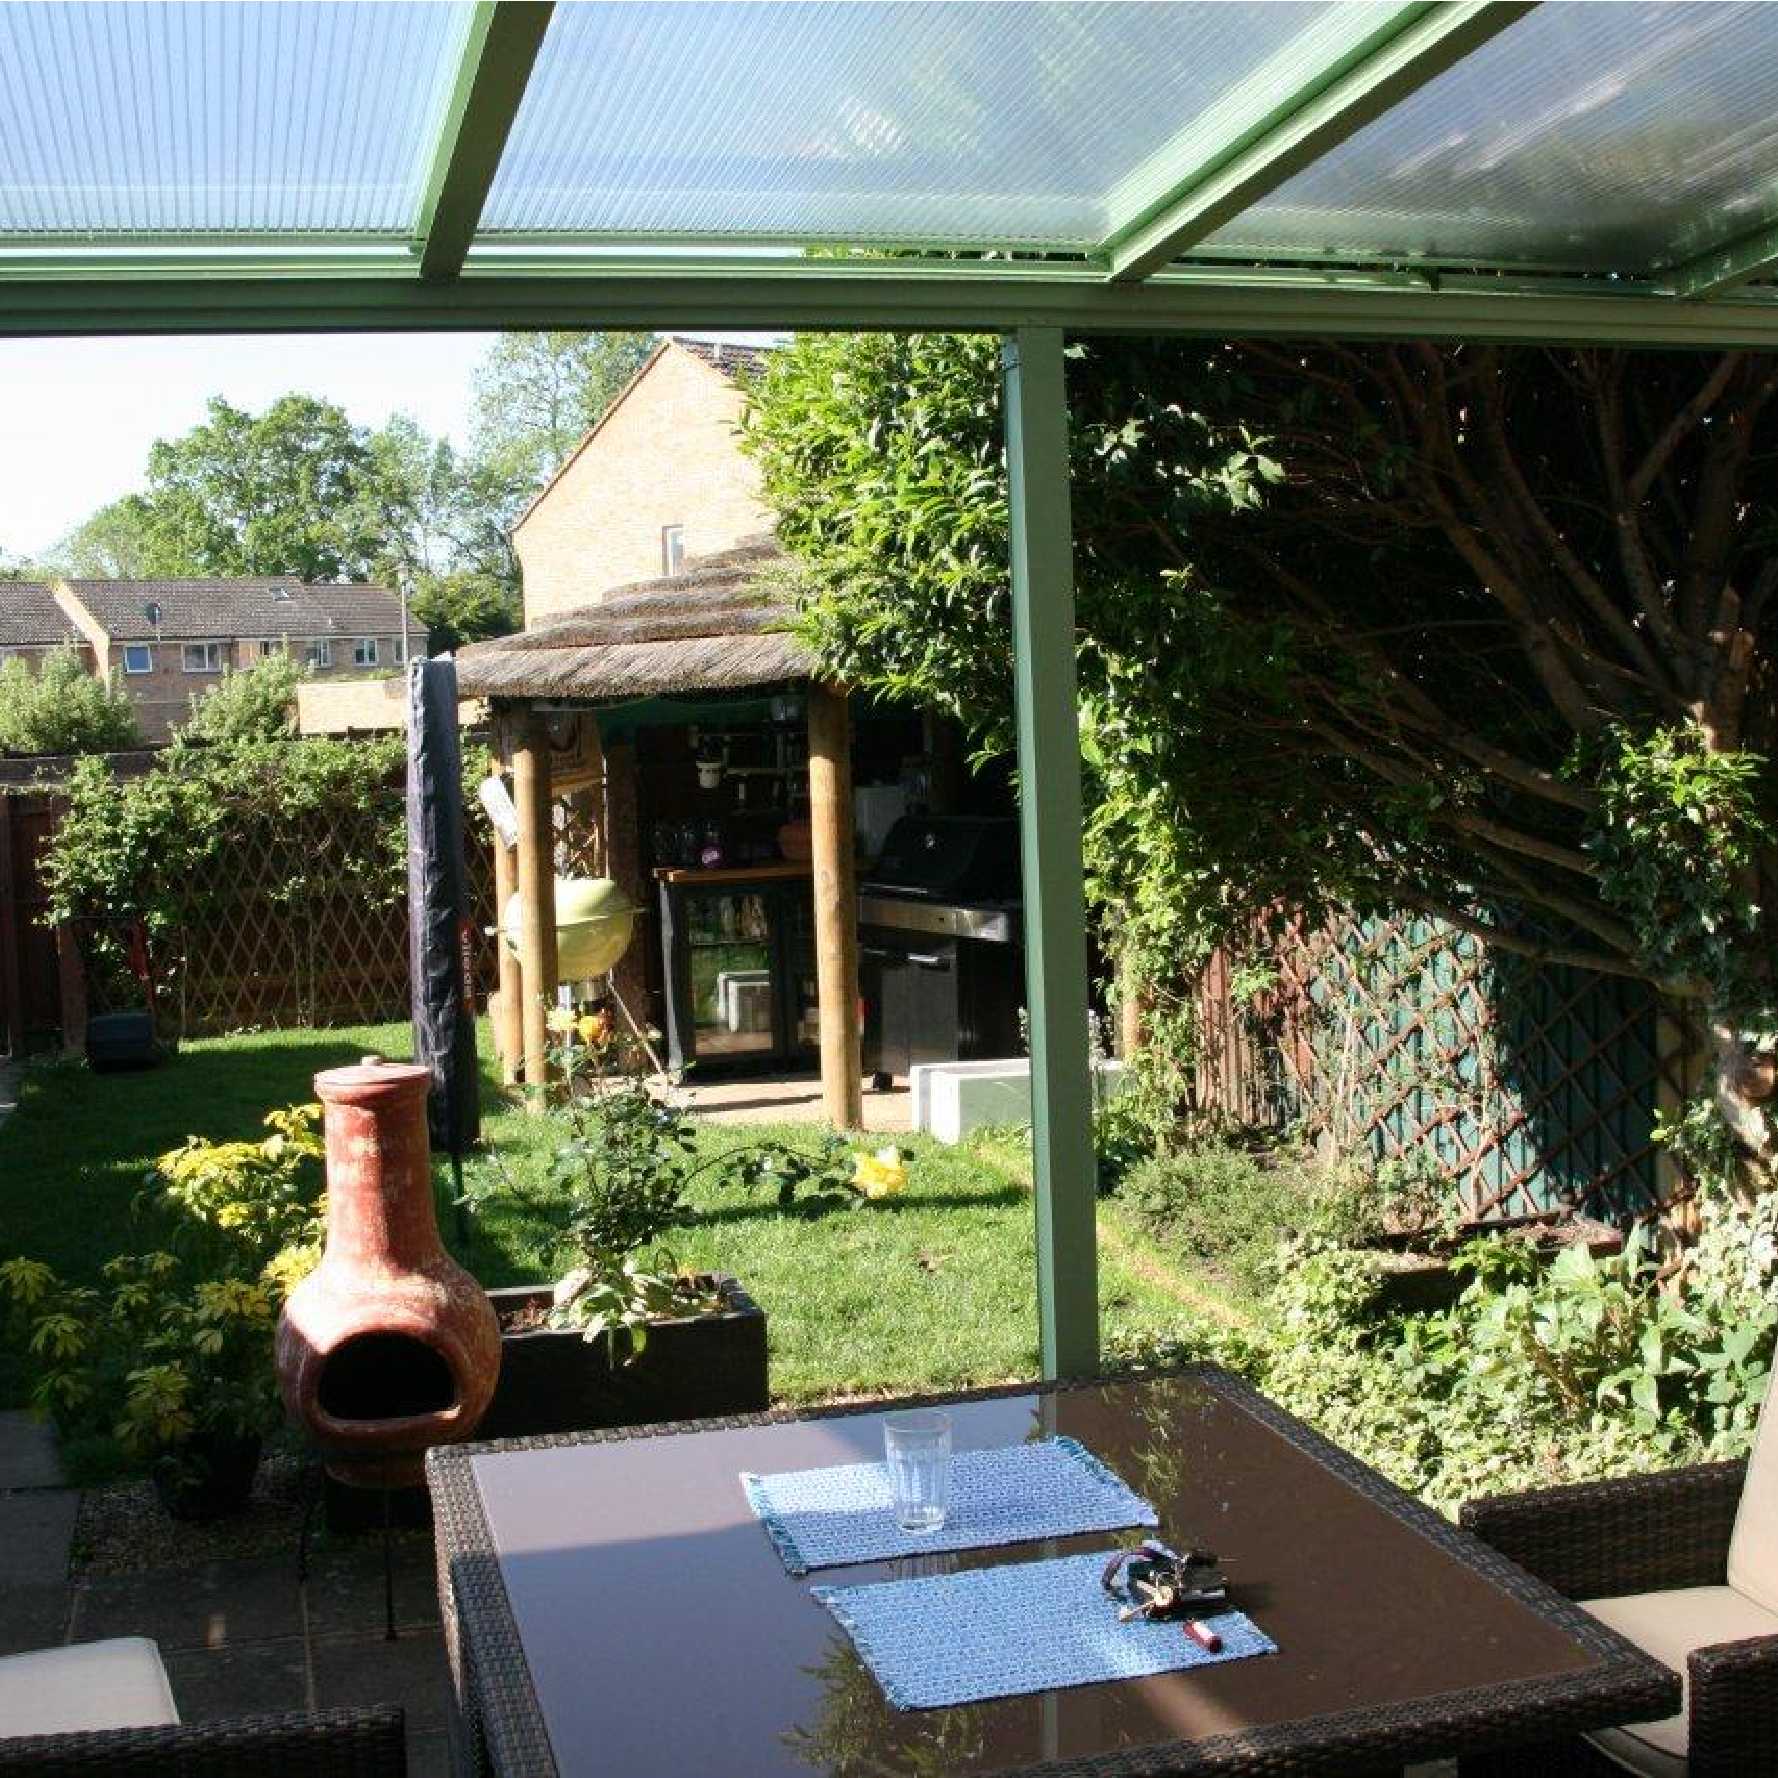 Affordable Omega Smart Lean-To Canopy, White with 16mm Polycarbonate Glazing - 10.6m (W) x 3.5m (P), (5) Supporting Posts